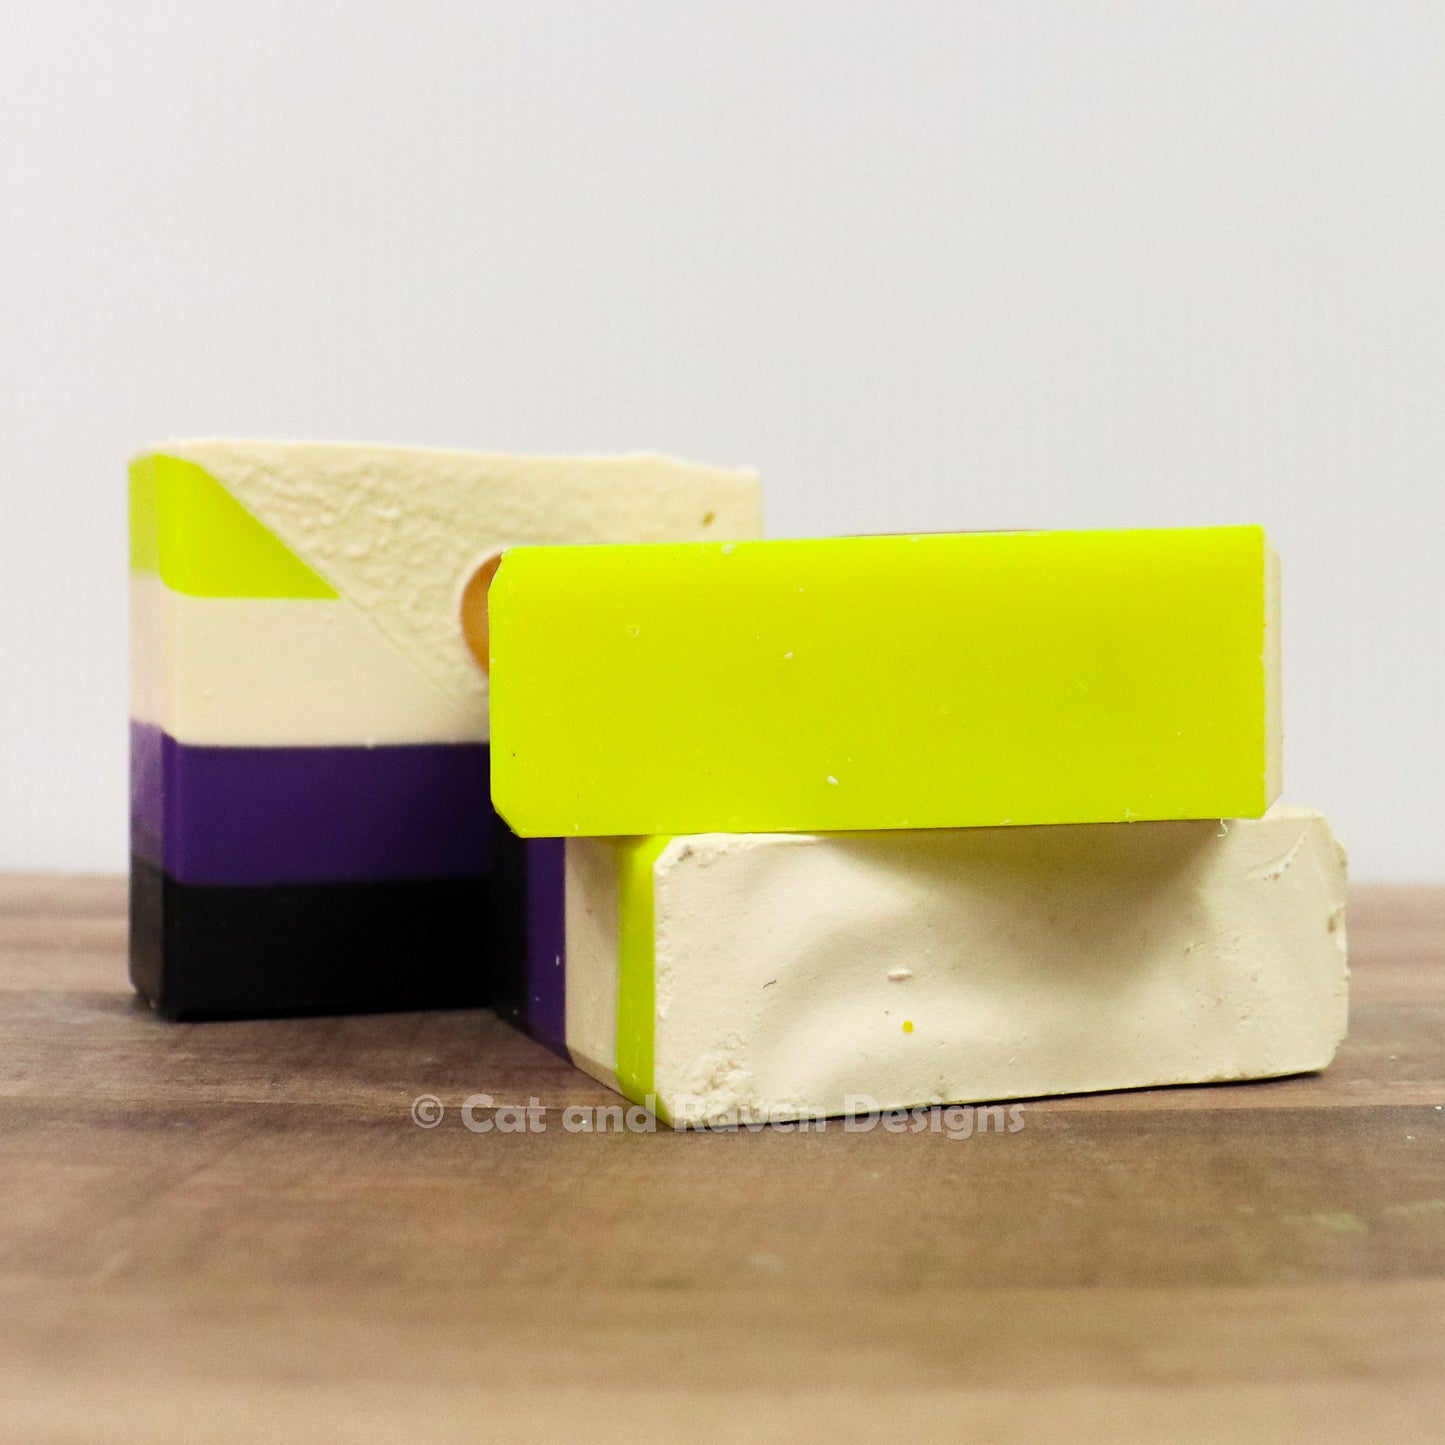 Theydies and Gentlethem (nonbinary pride flag) soap